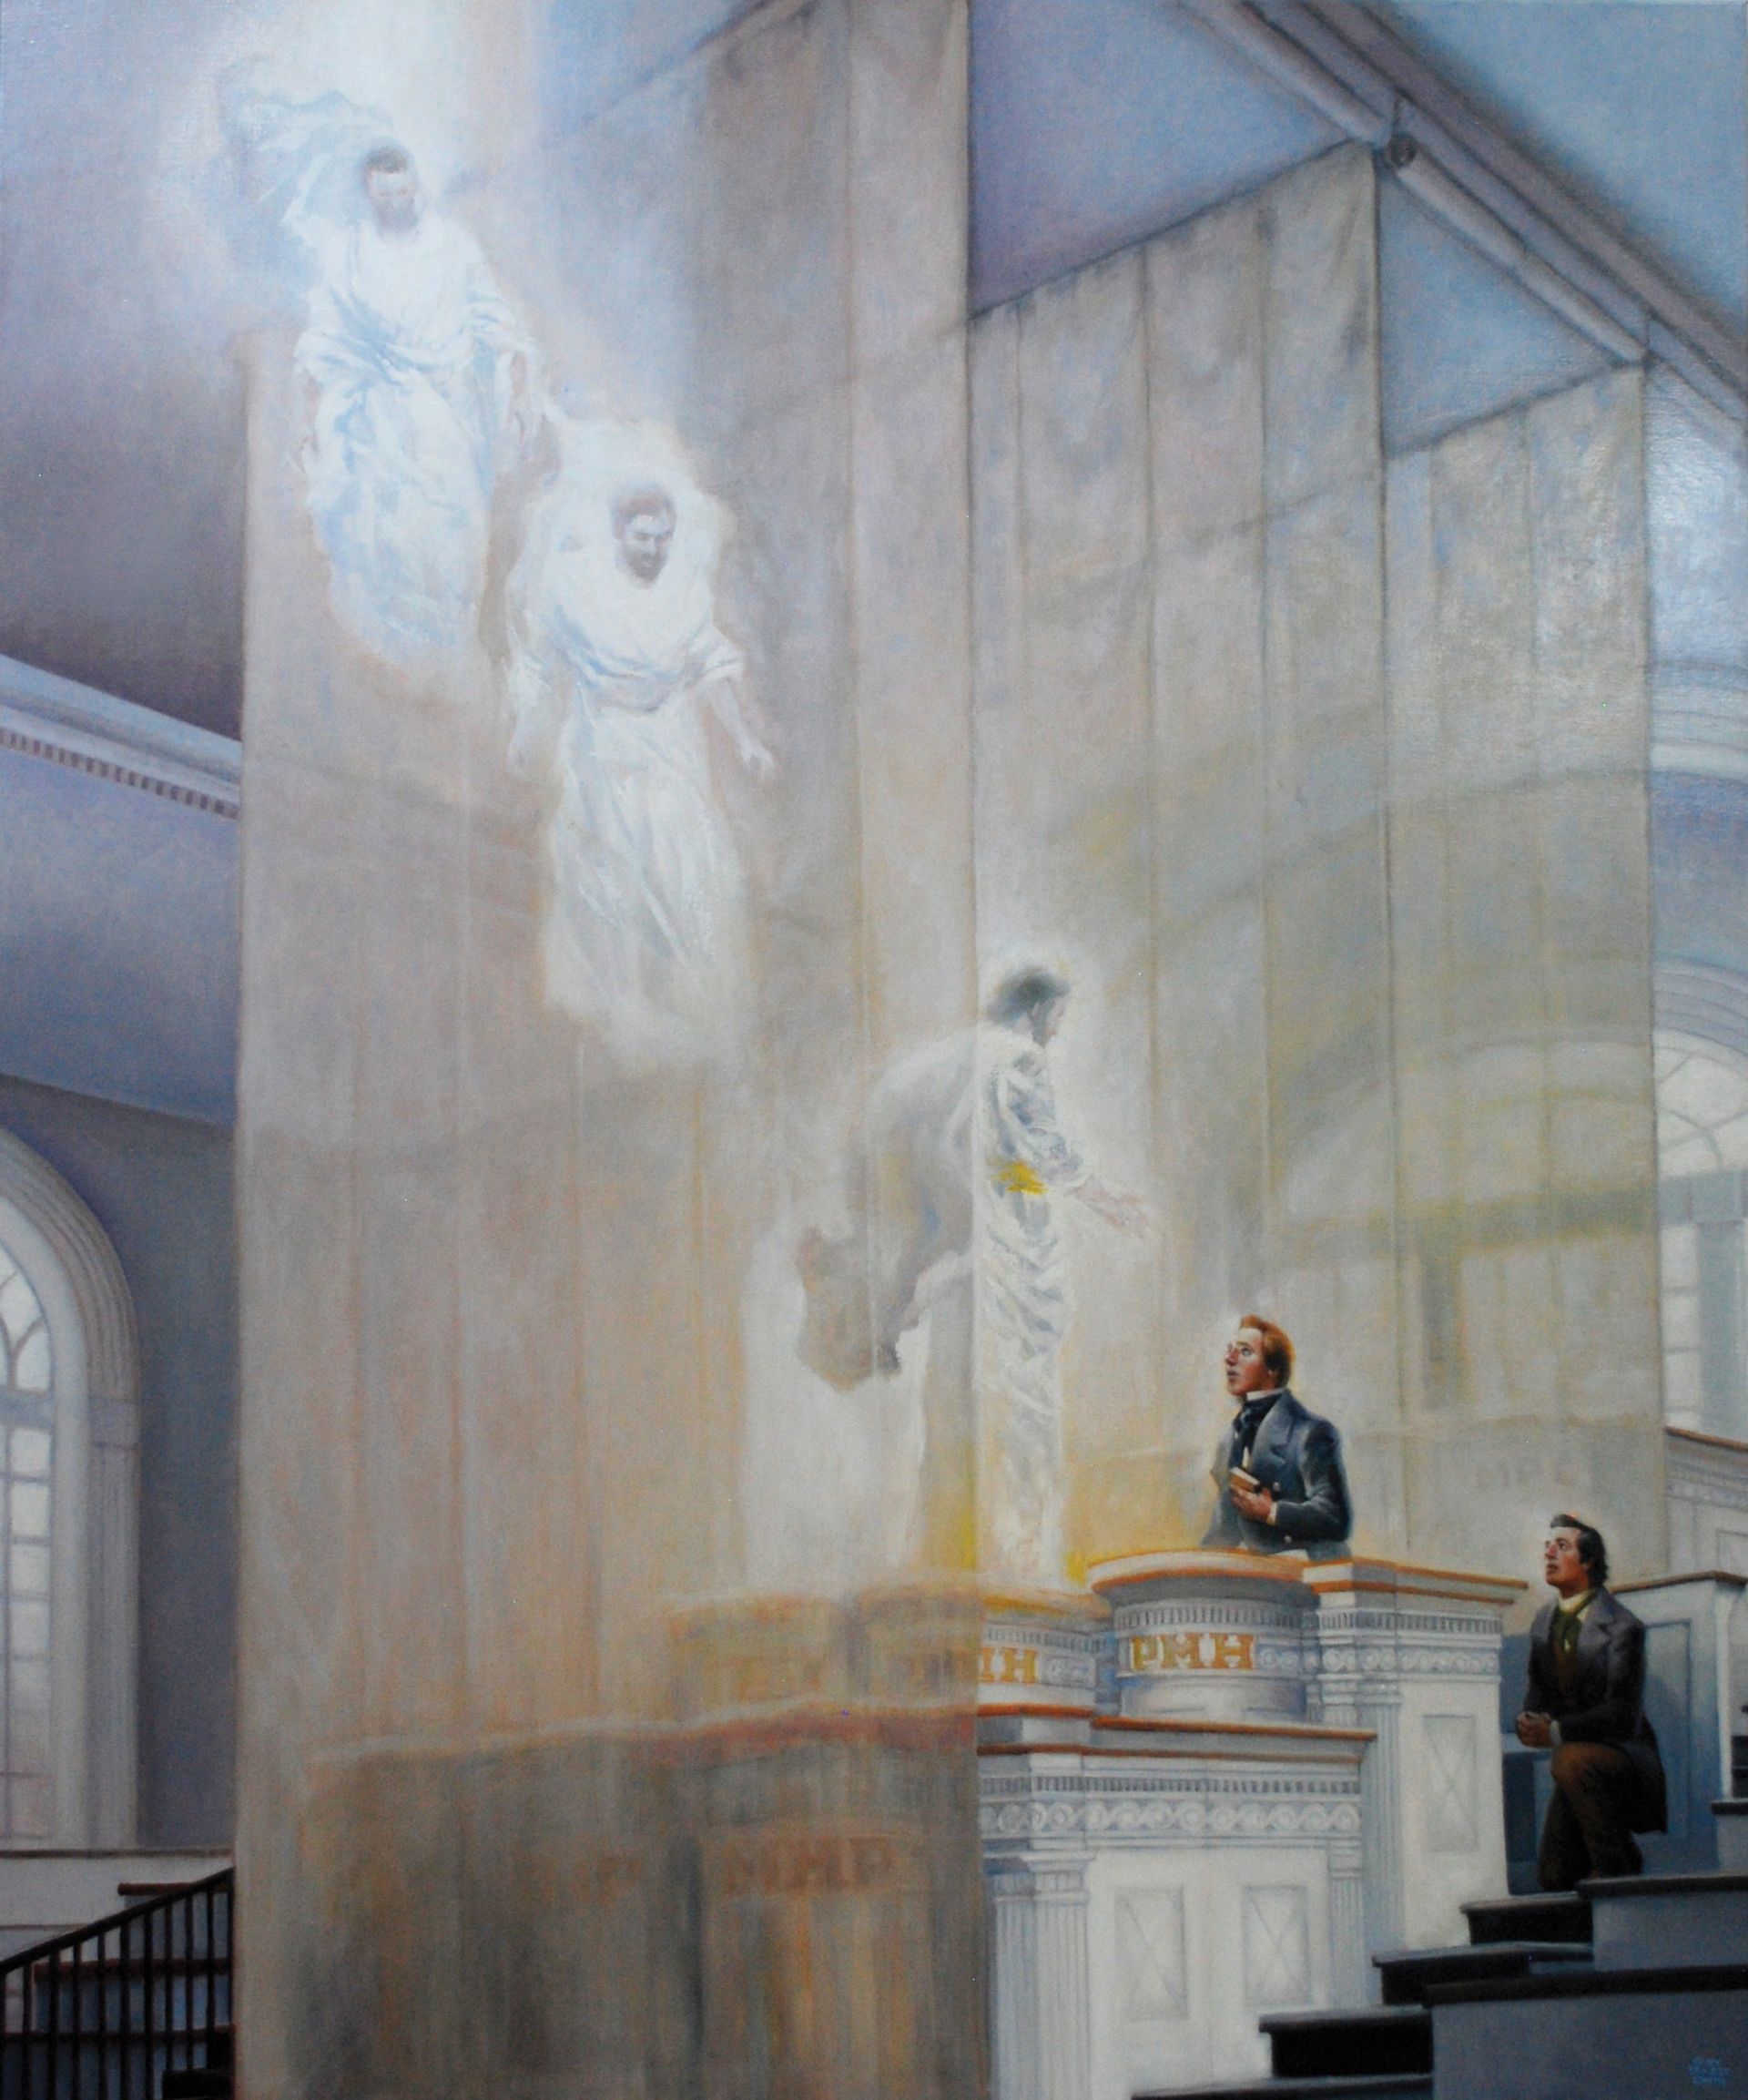 Moses, Elias, and Elijah Appear in the Kirtland Temple, by Gary E. Smith